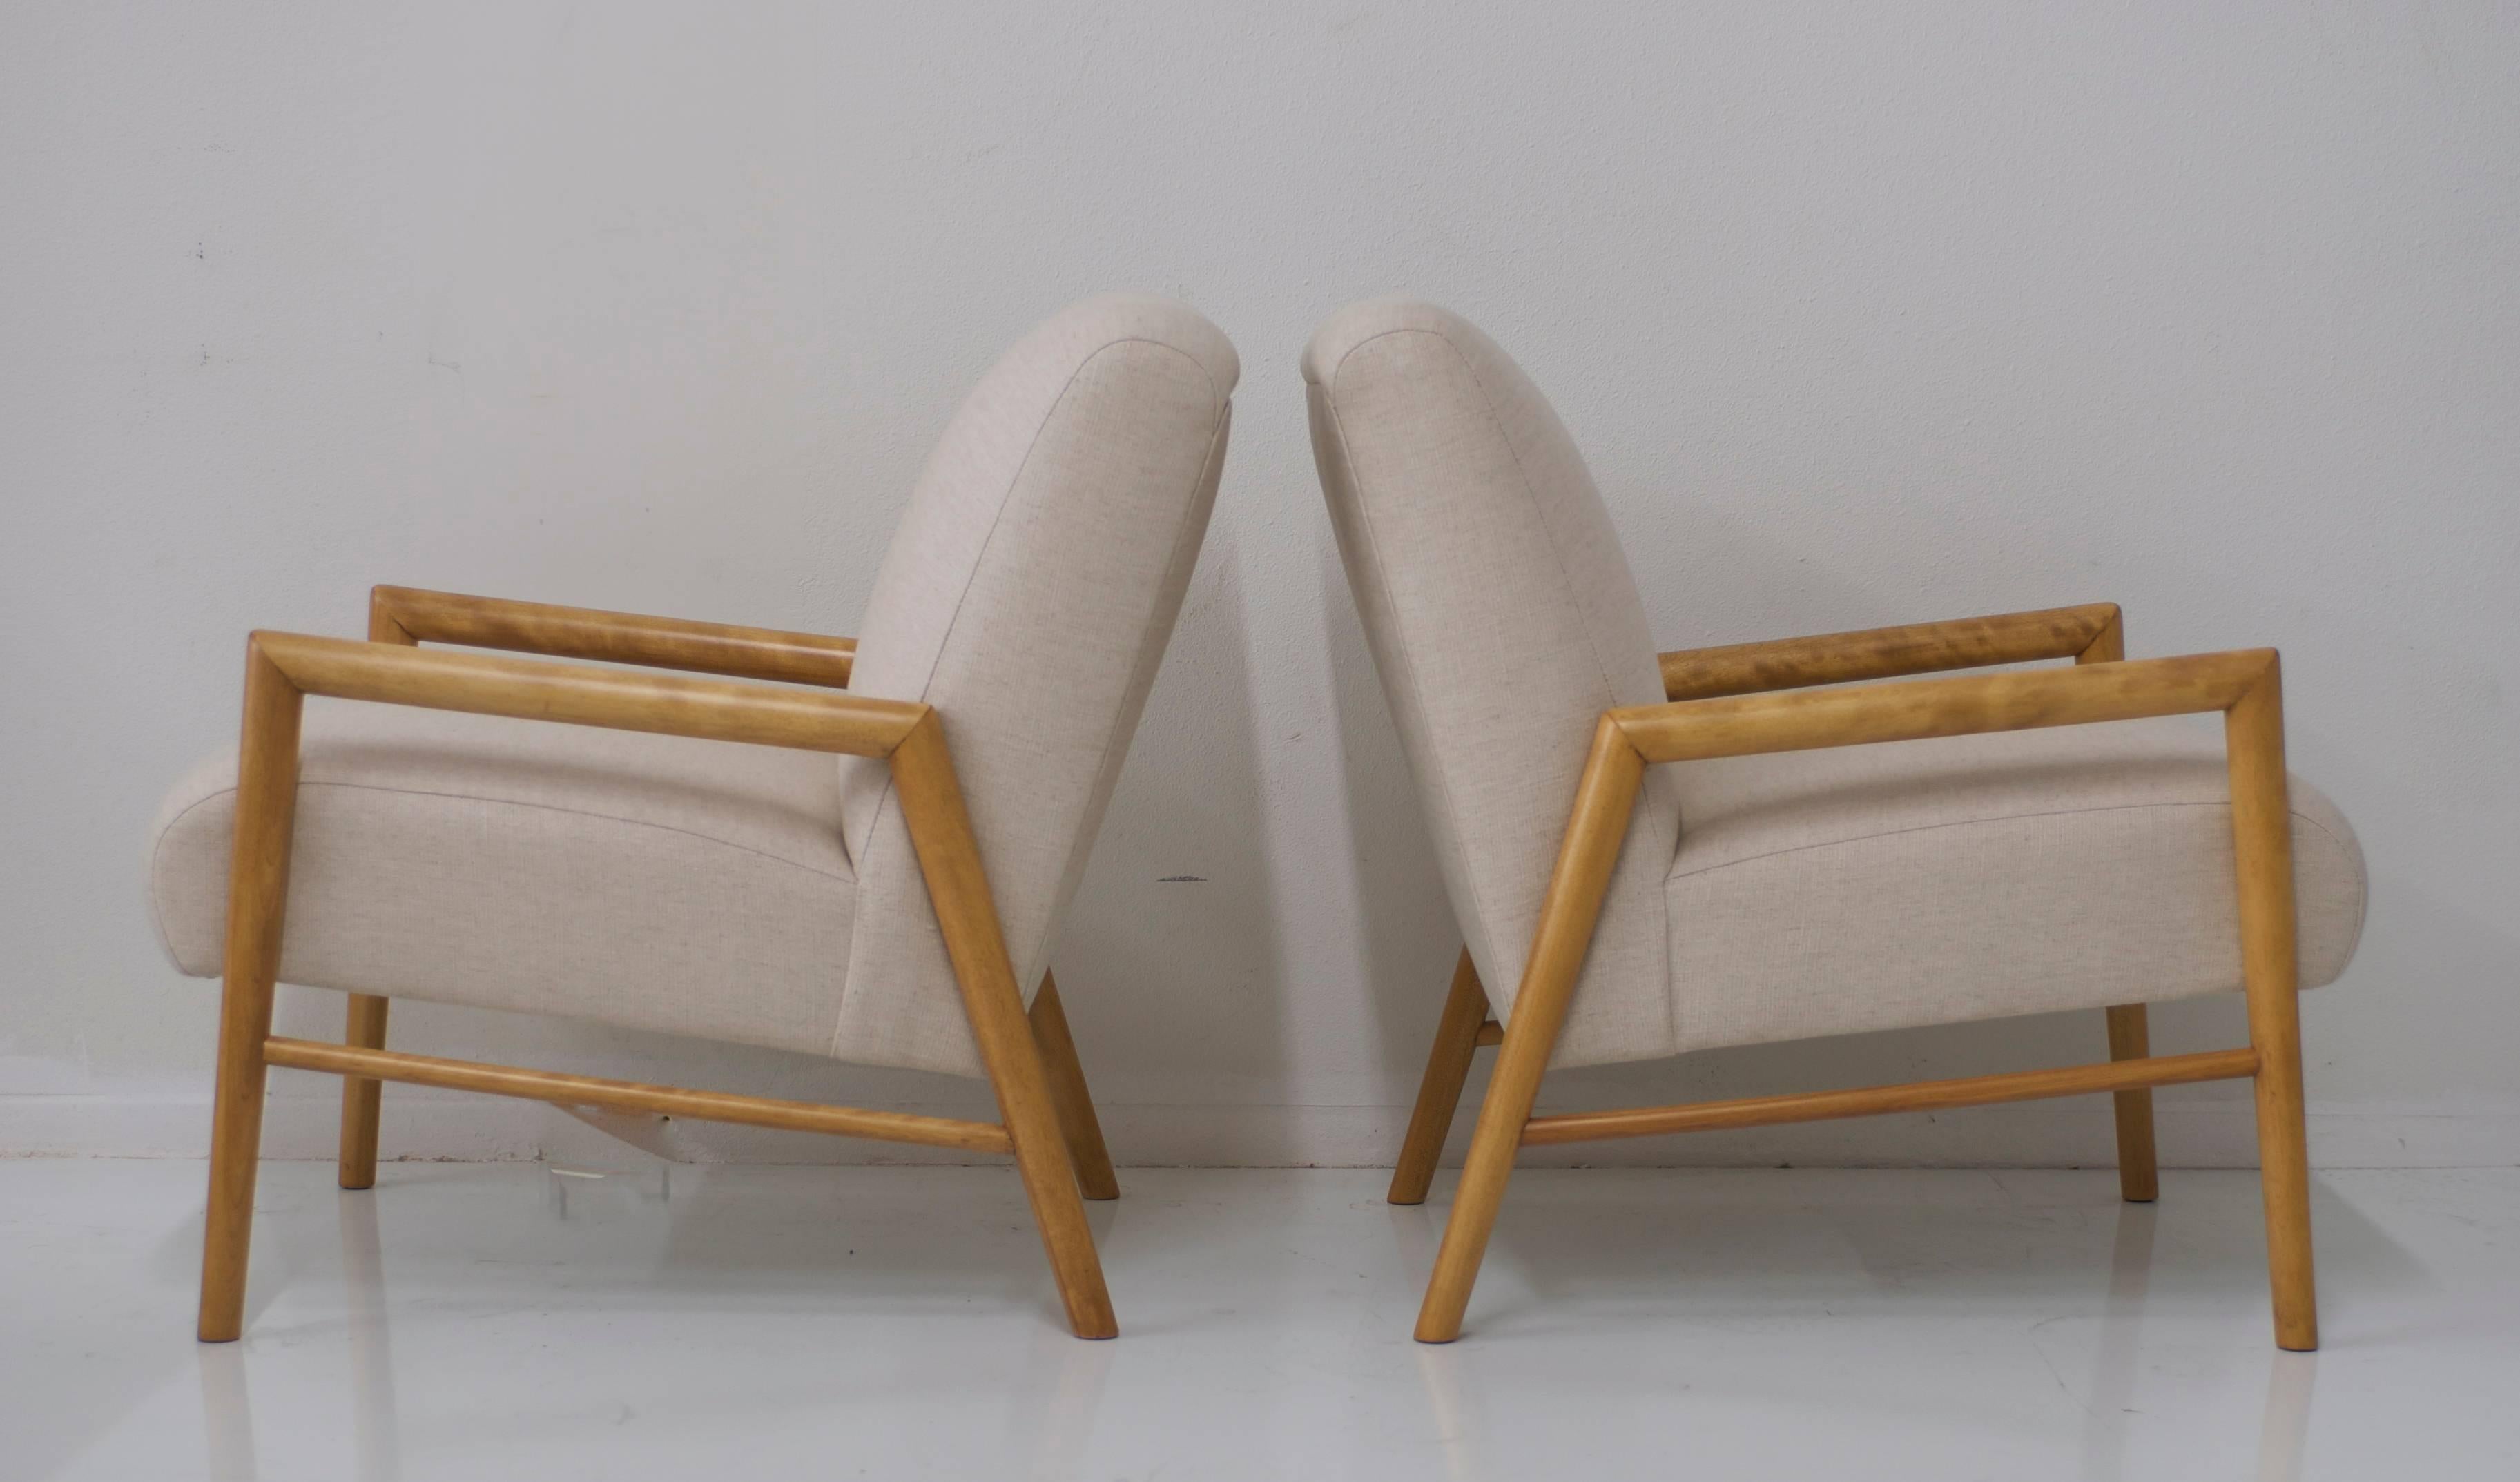 A pair of handsome Mid-Century lounge chairs designed by Leslie Diamond for Conant Ball. The slanted hardwood frame has been professionally refinished to it's original luster. The chairs have been reupholstered in a beautiful sand colored fine